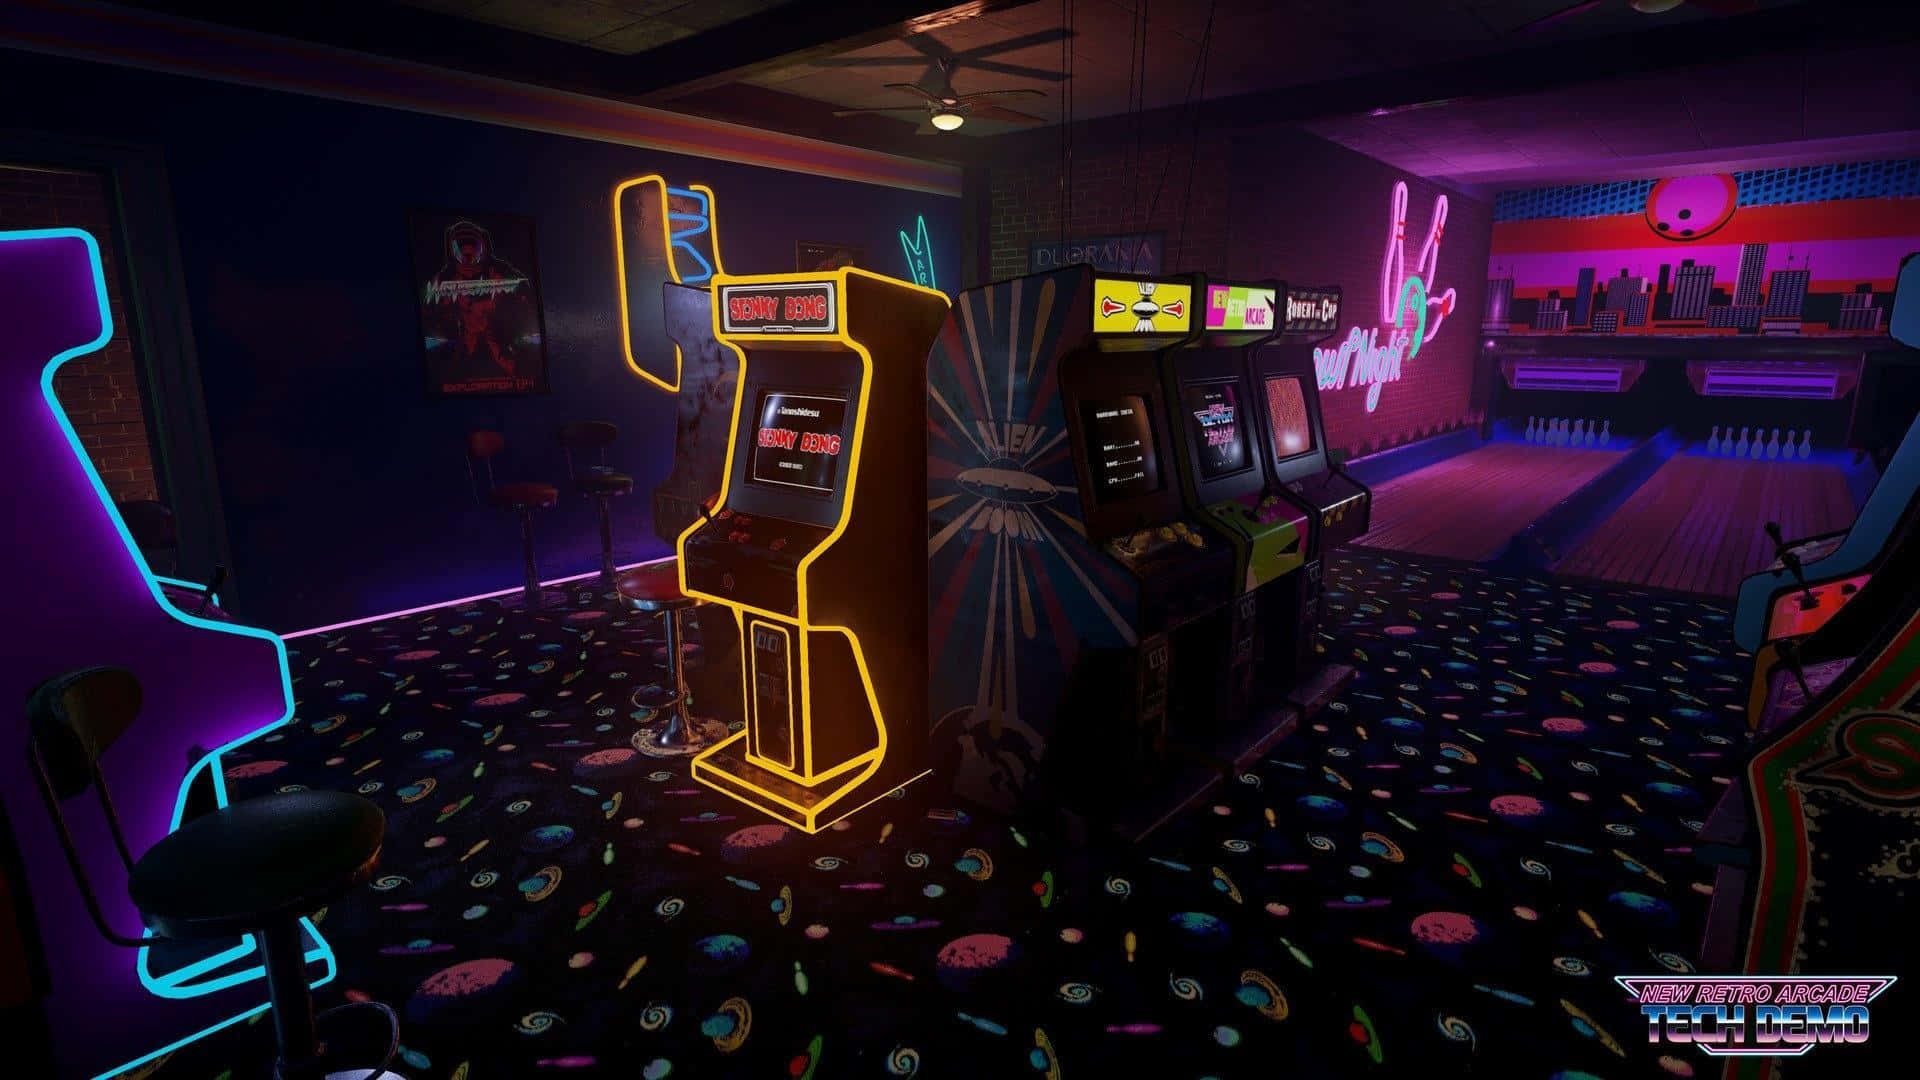 A neon lit arcade room with several games - Arcade